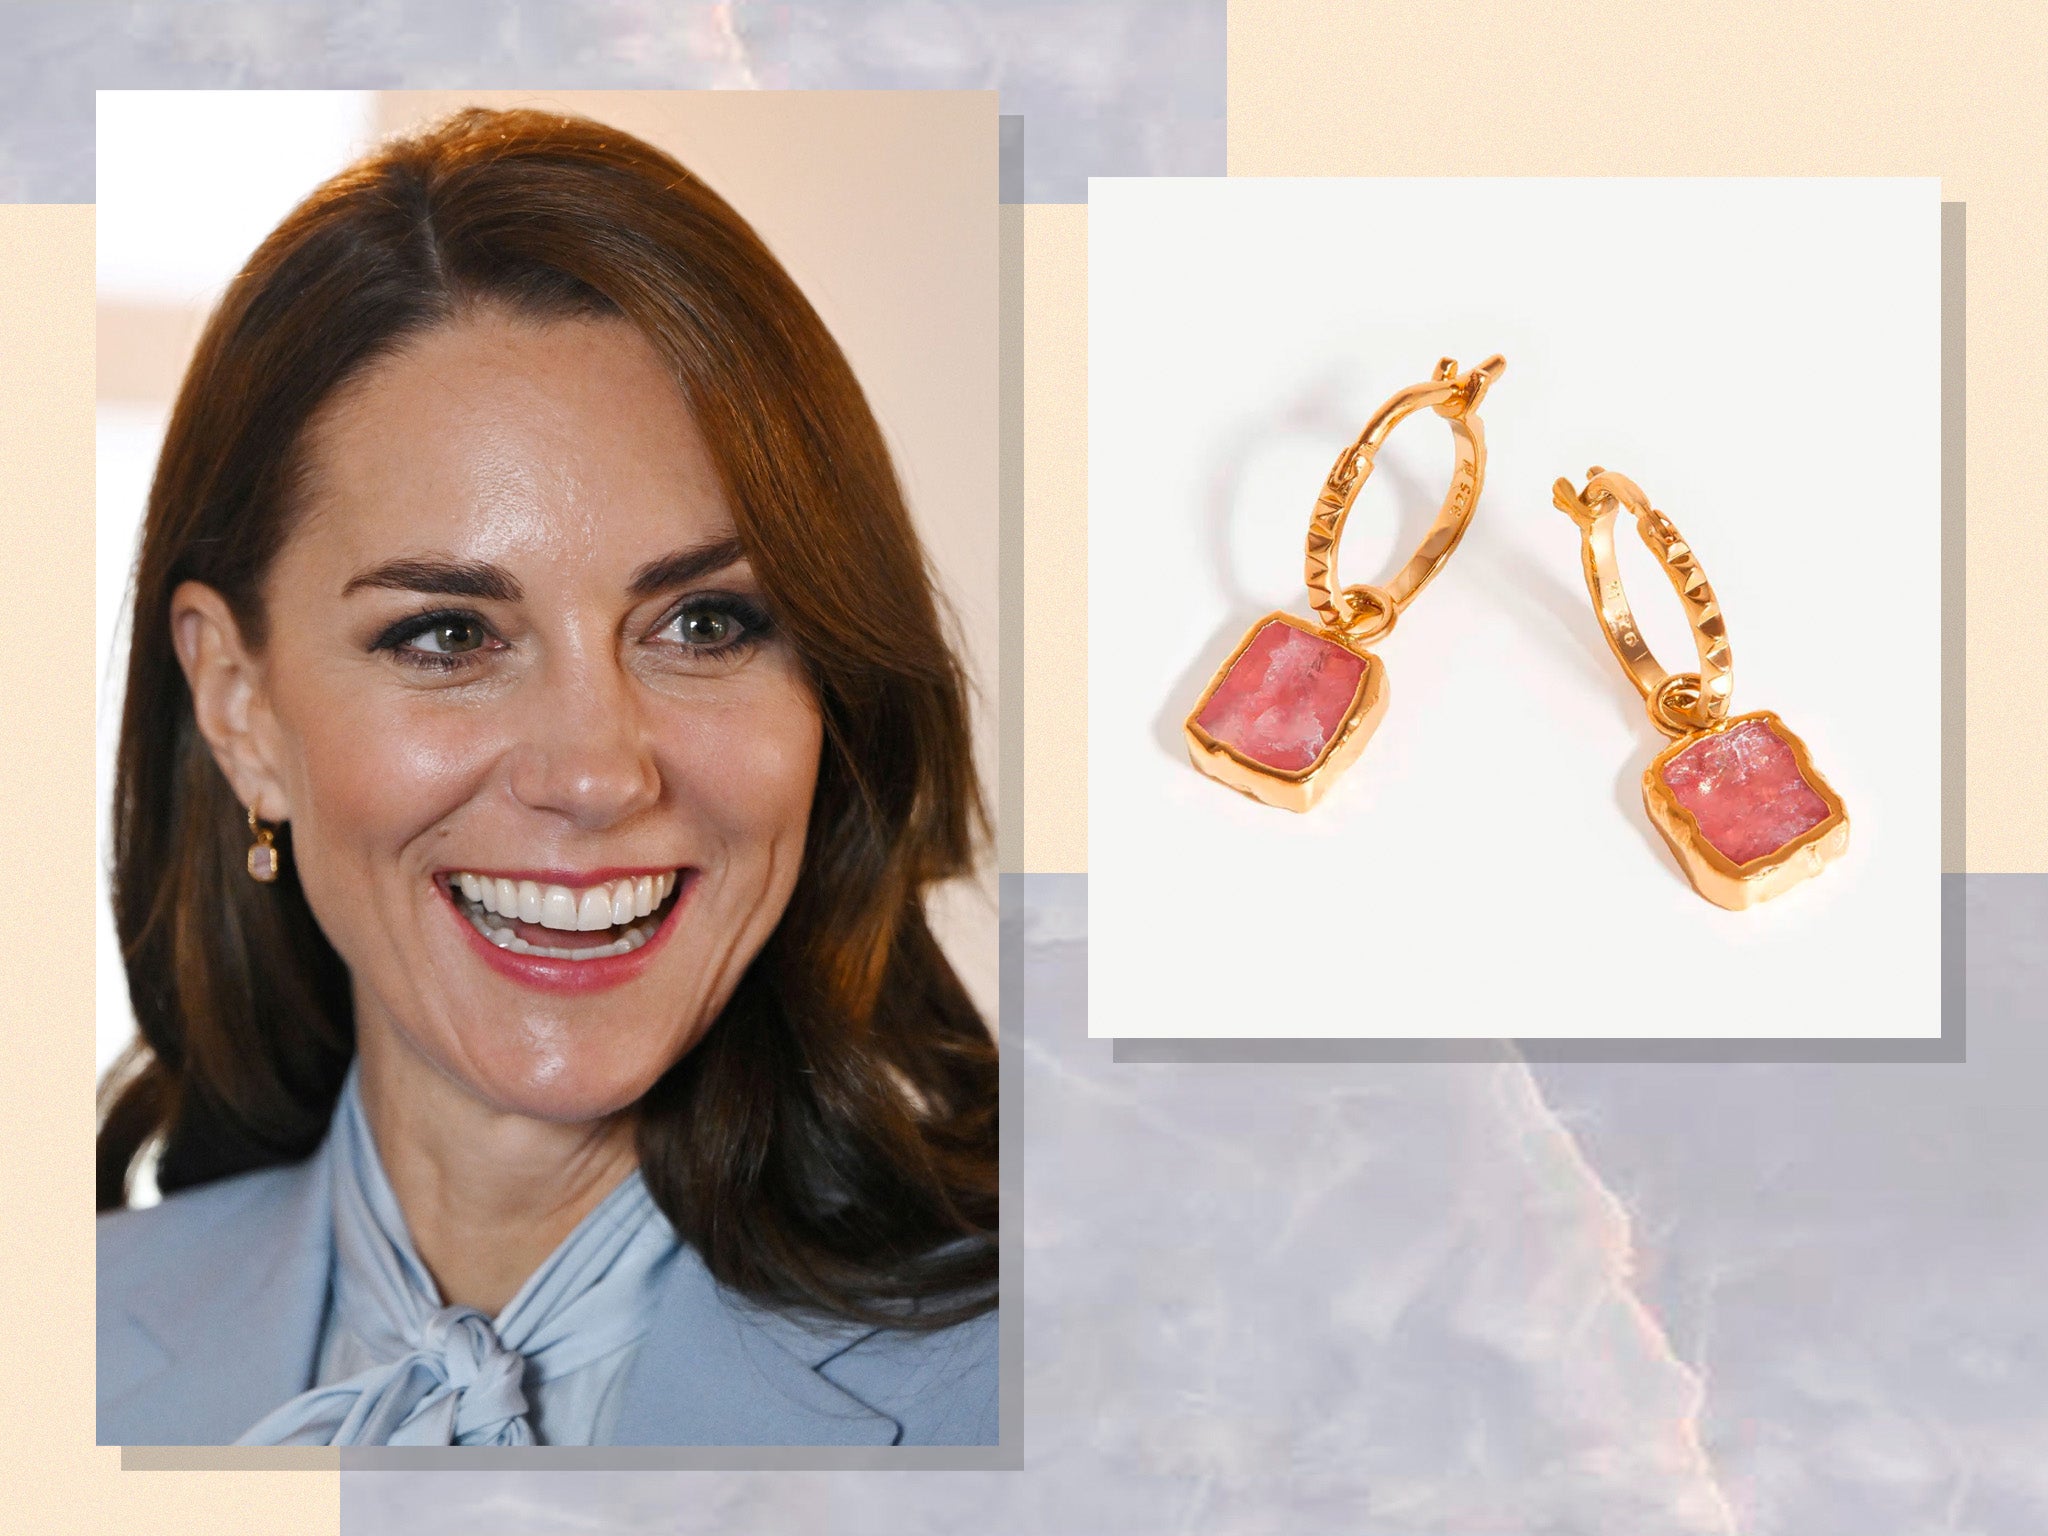 Kate has worn the pyramid earrings more than 10 times before